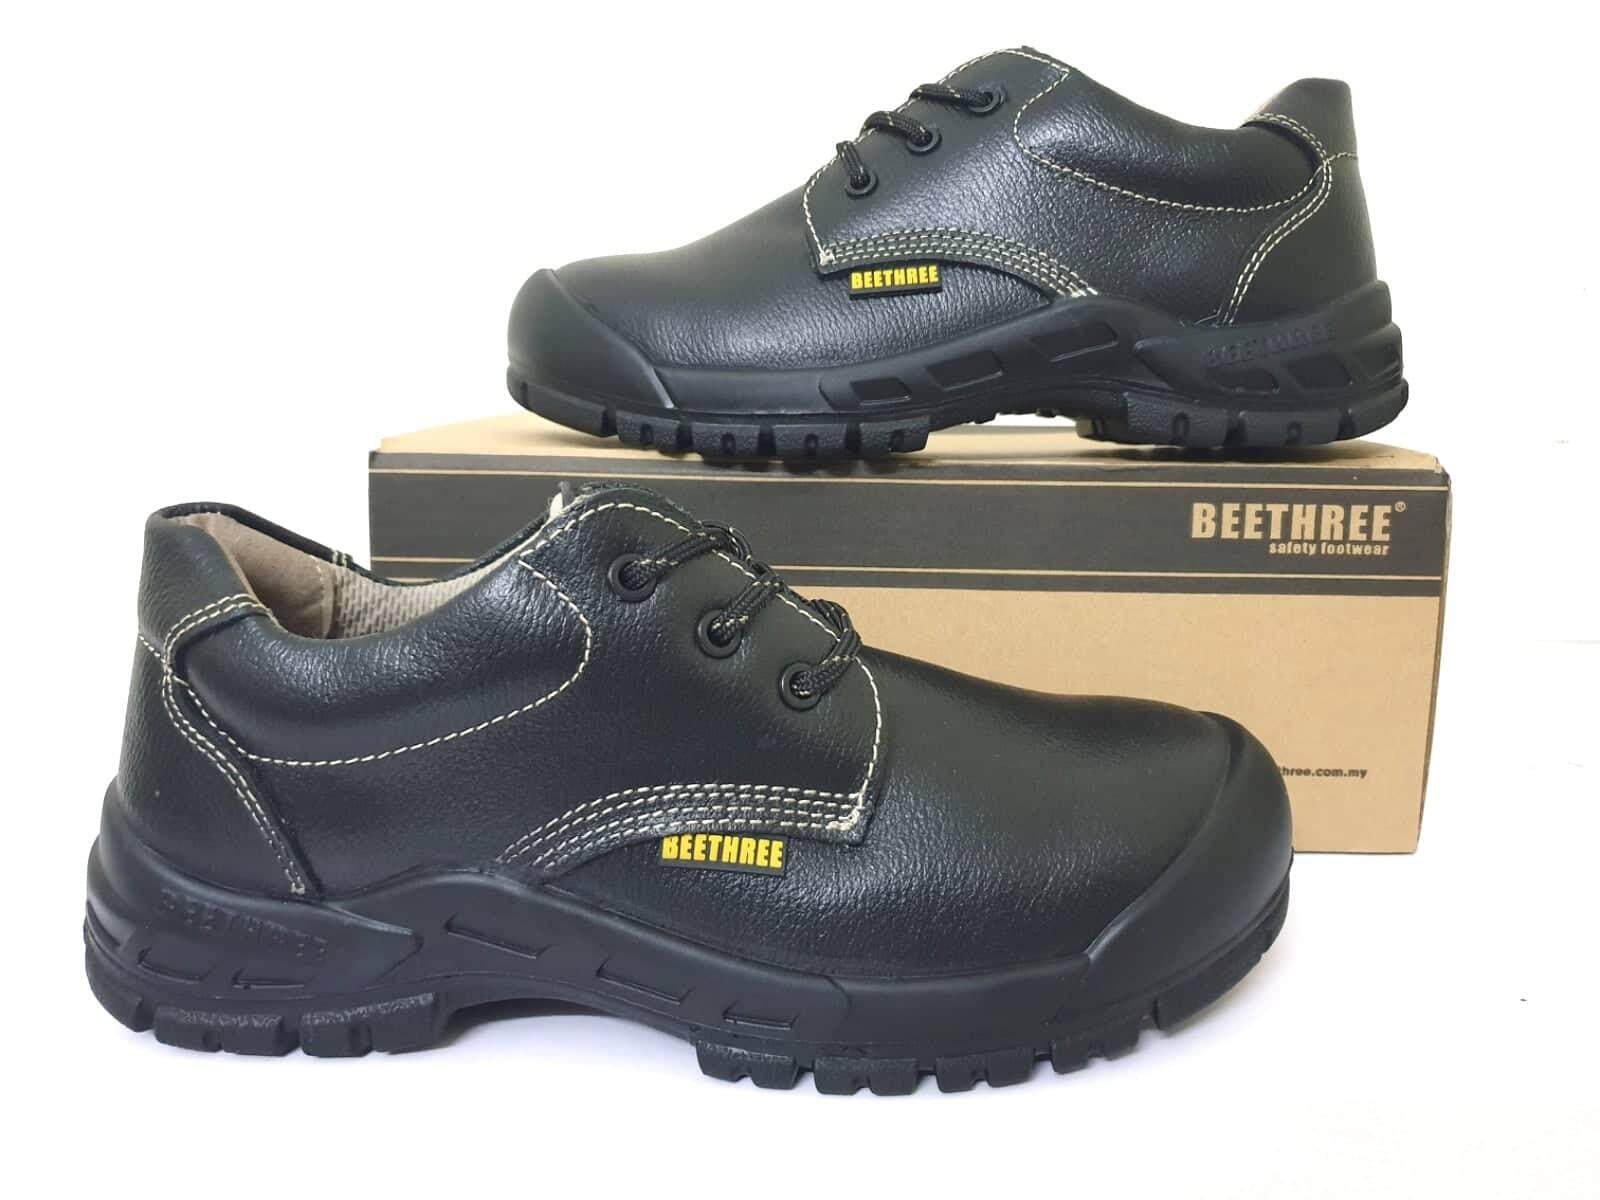 beethree safety shoes